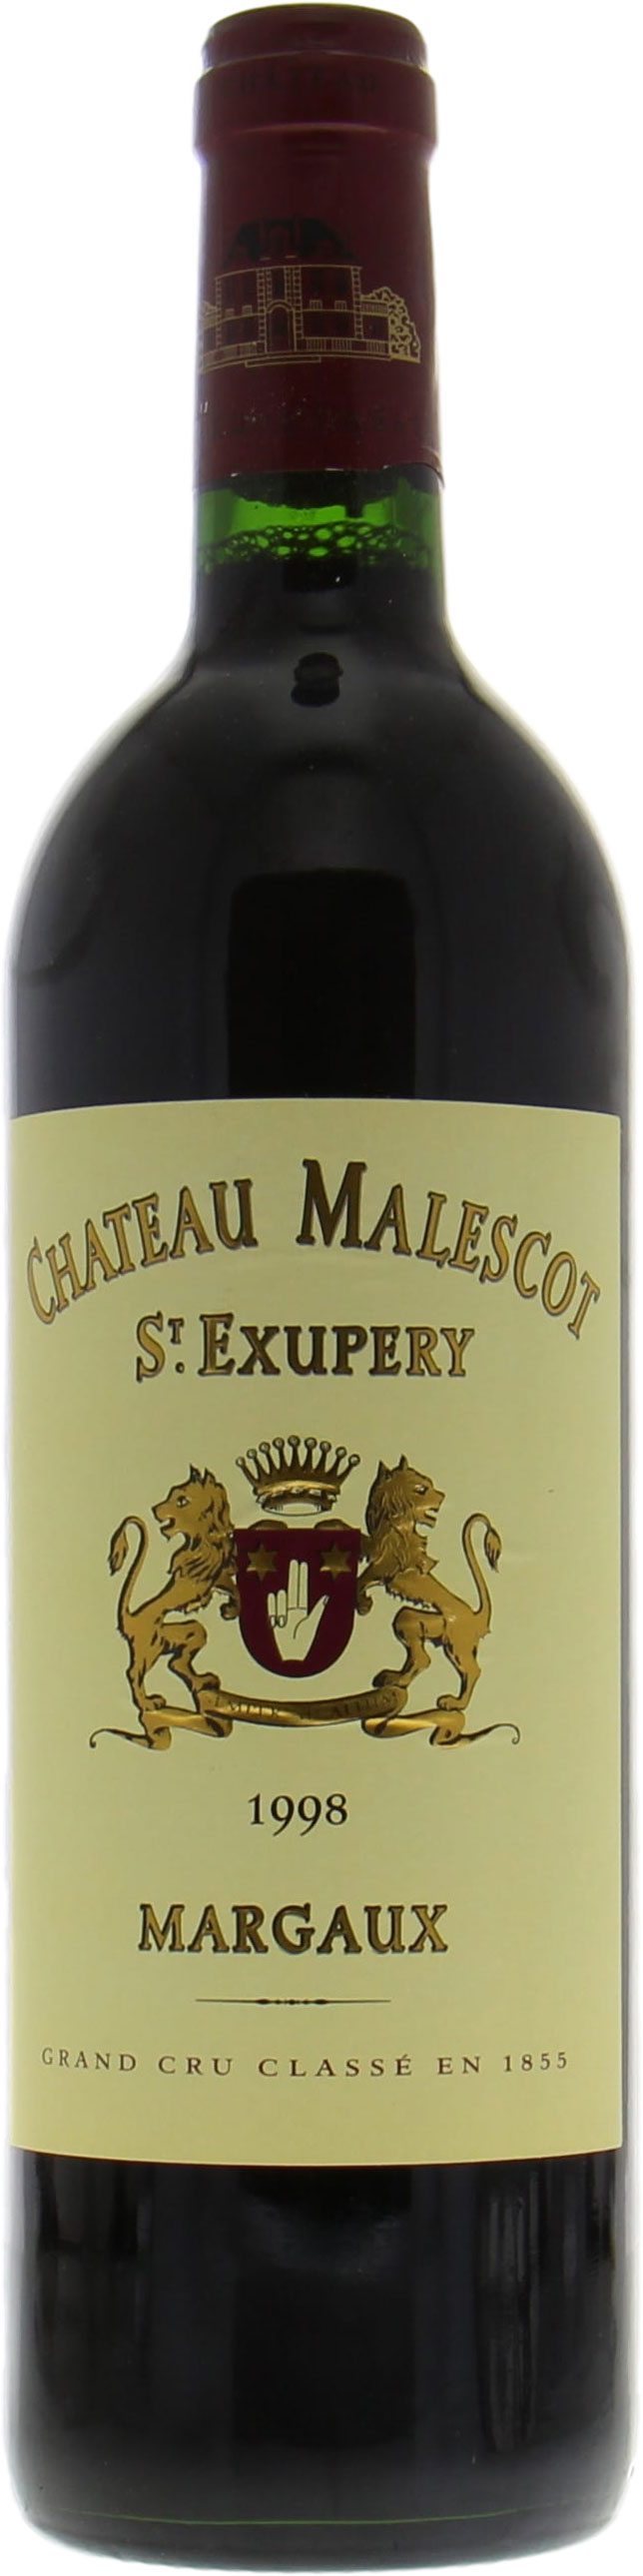 Chateau Malescot-St-Exupery - Chateau Malescot-St-Exupery 1998 Edition 2022